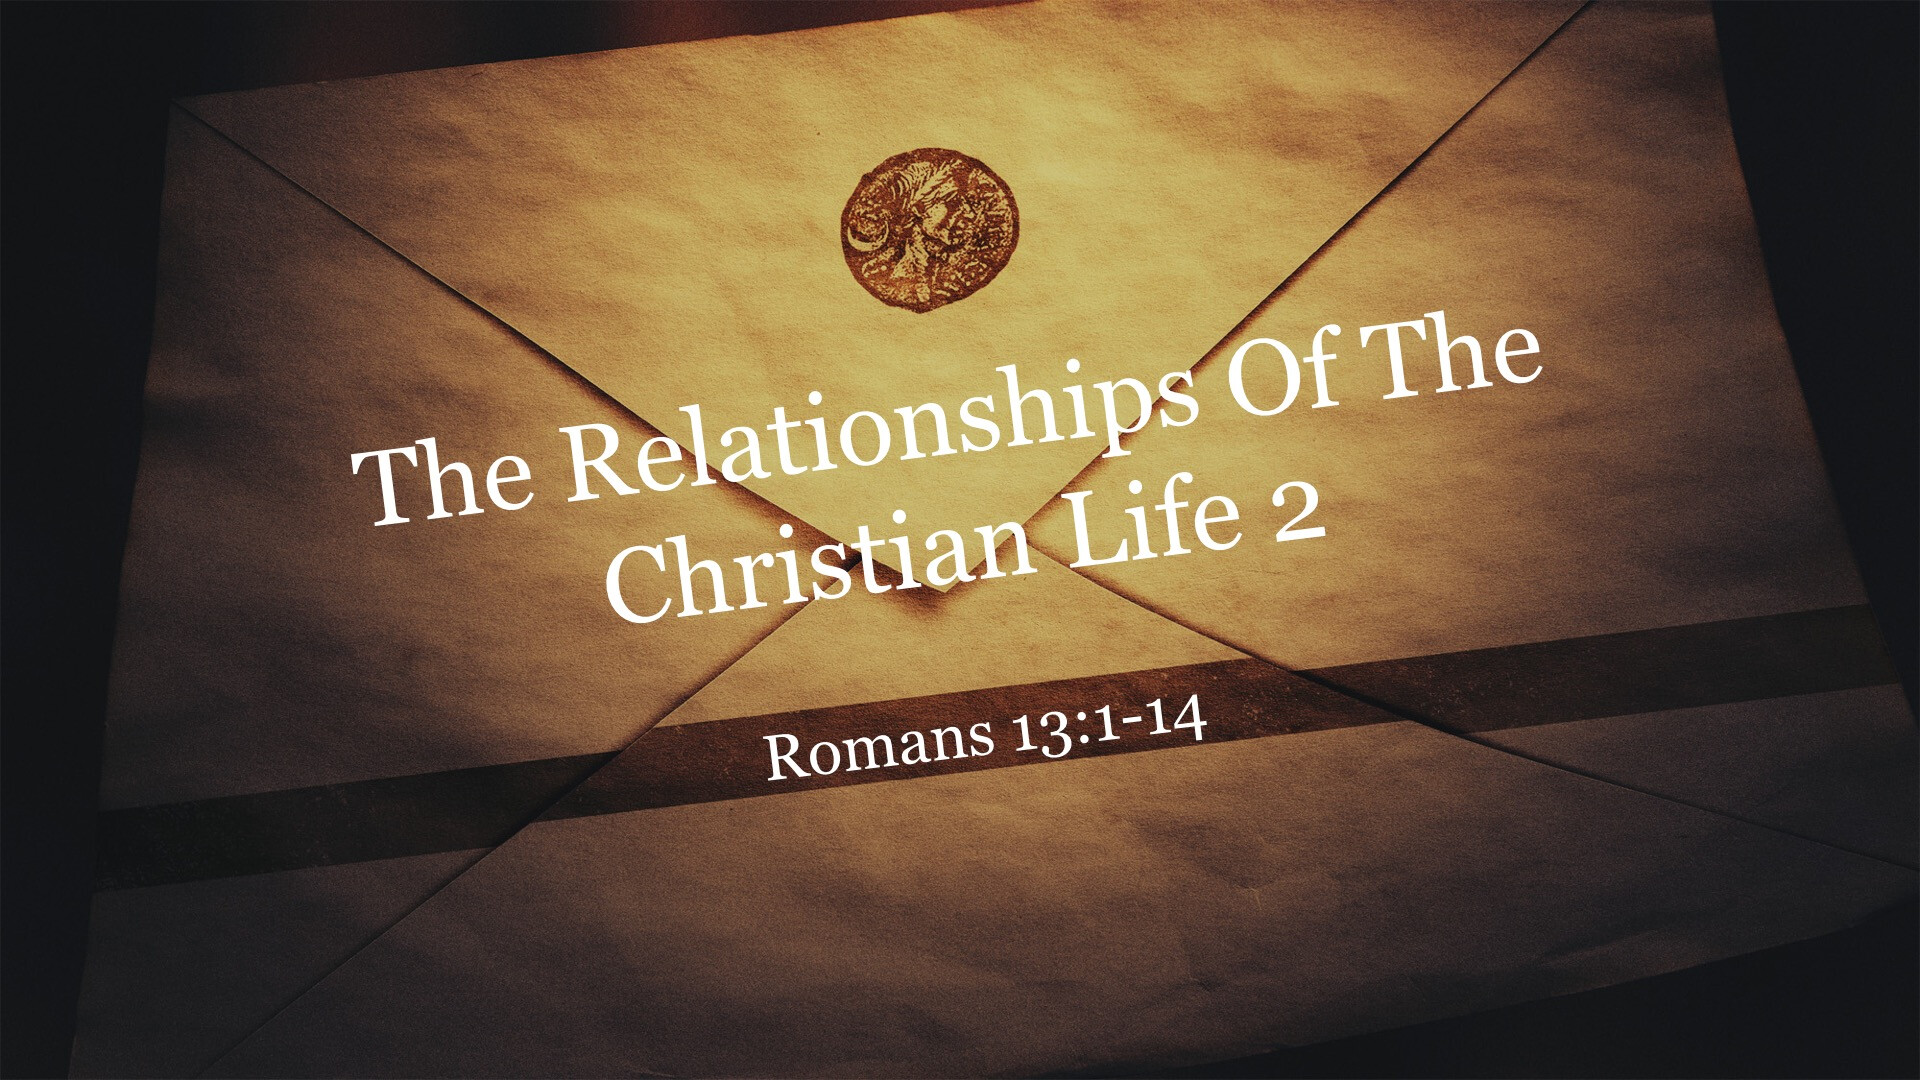 The Relationships of the Christian Life Part II